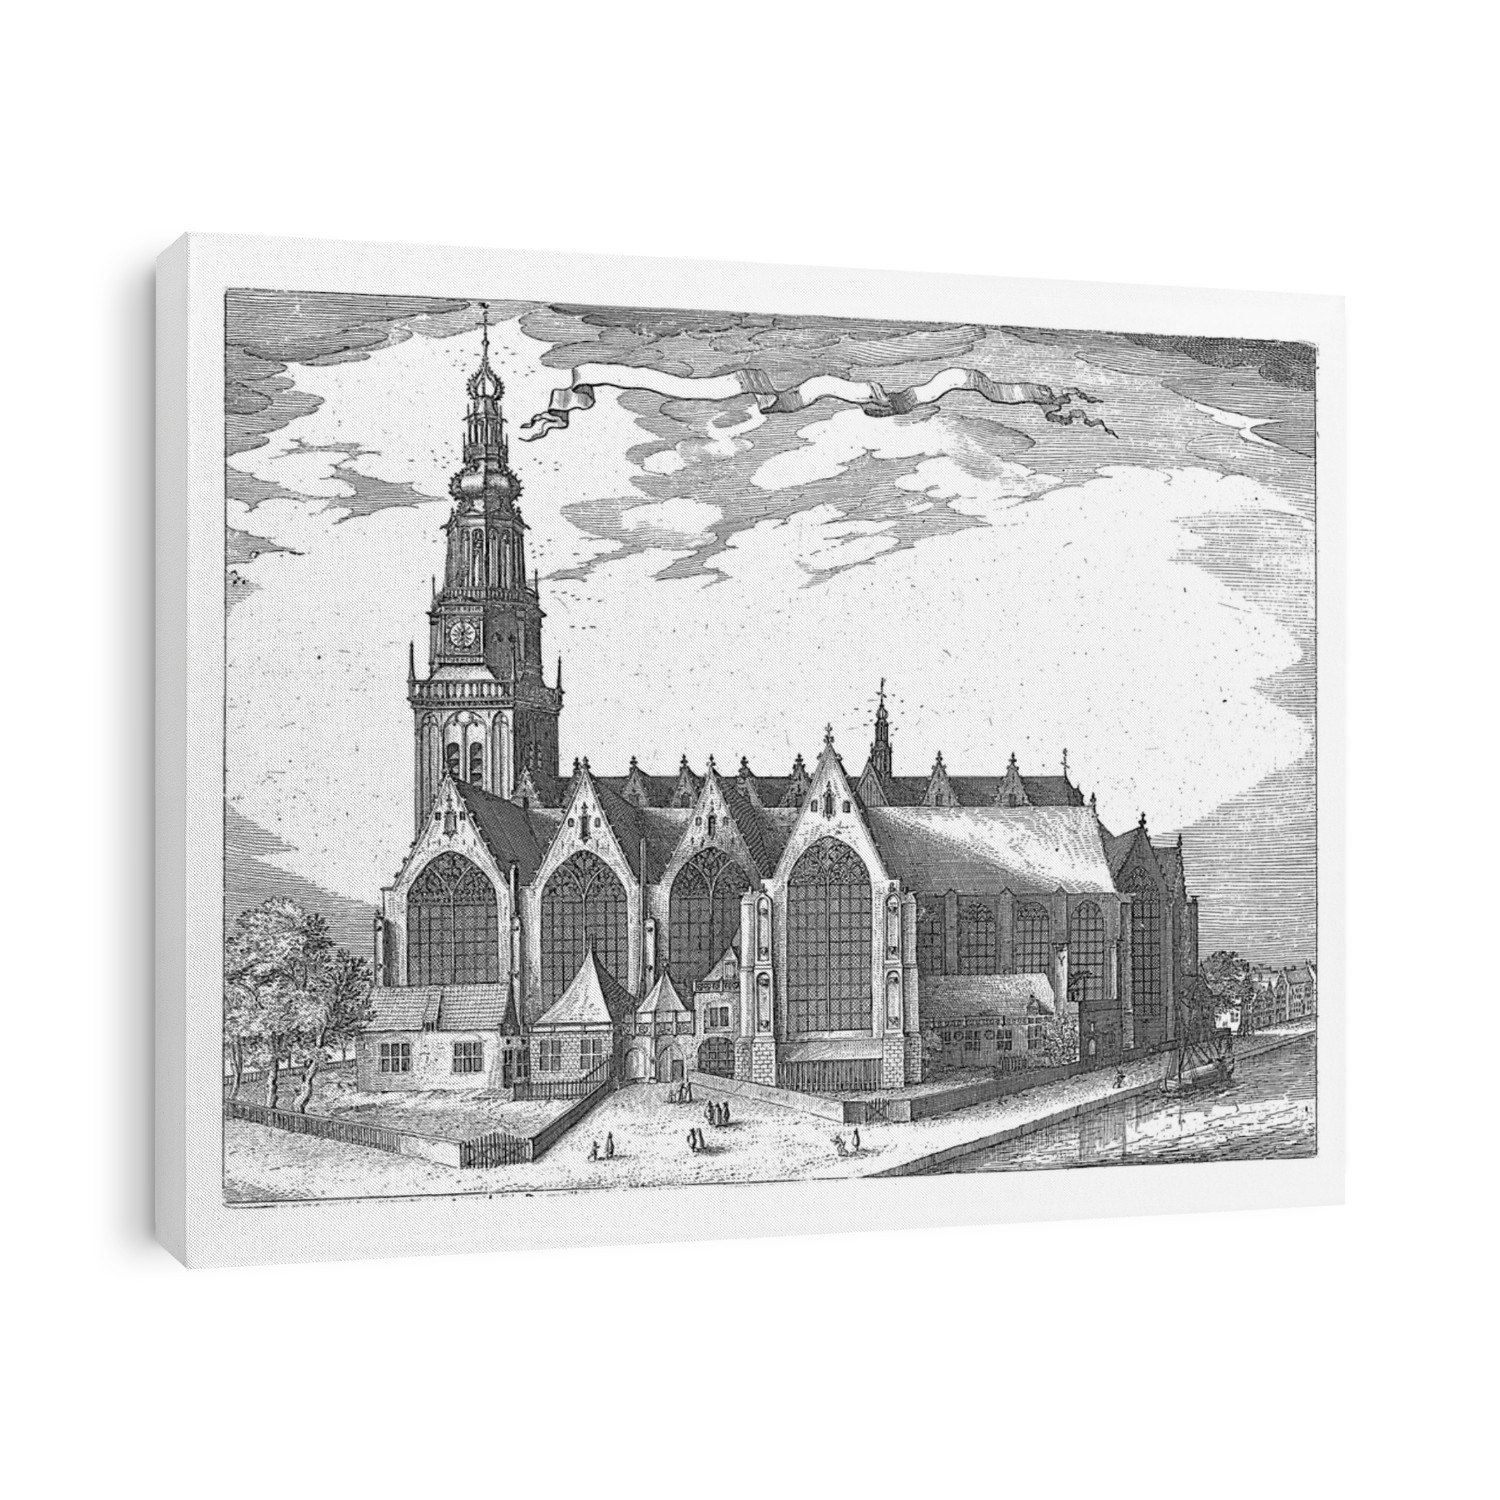 View of the Oude Kerk, also known as the Sint-Nicolaaskerk, in Amsterdam. There are a few figures in front of the church and birds flying around the tower.